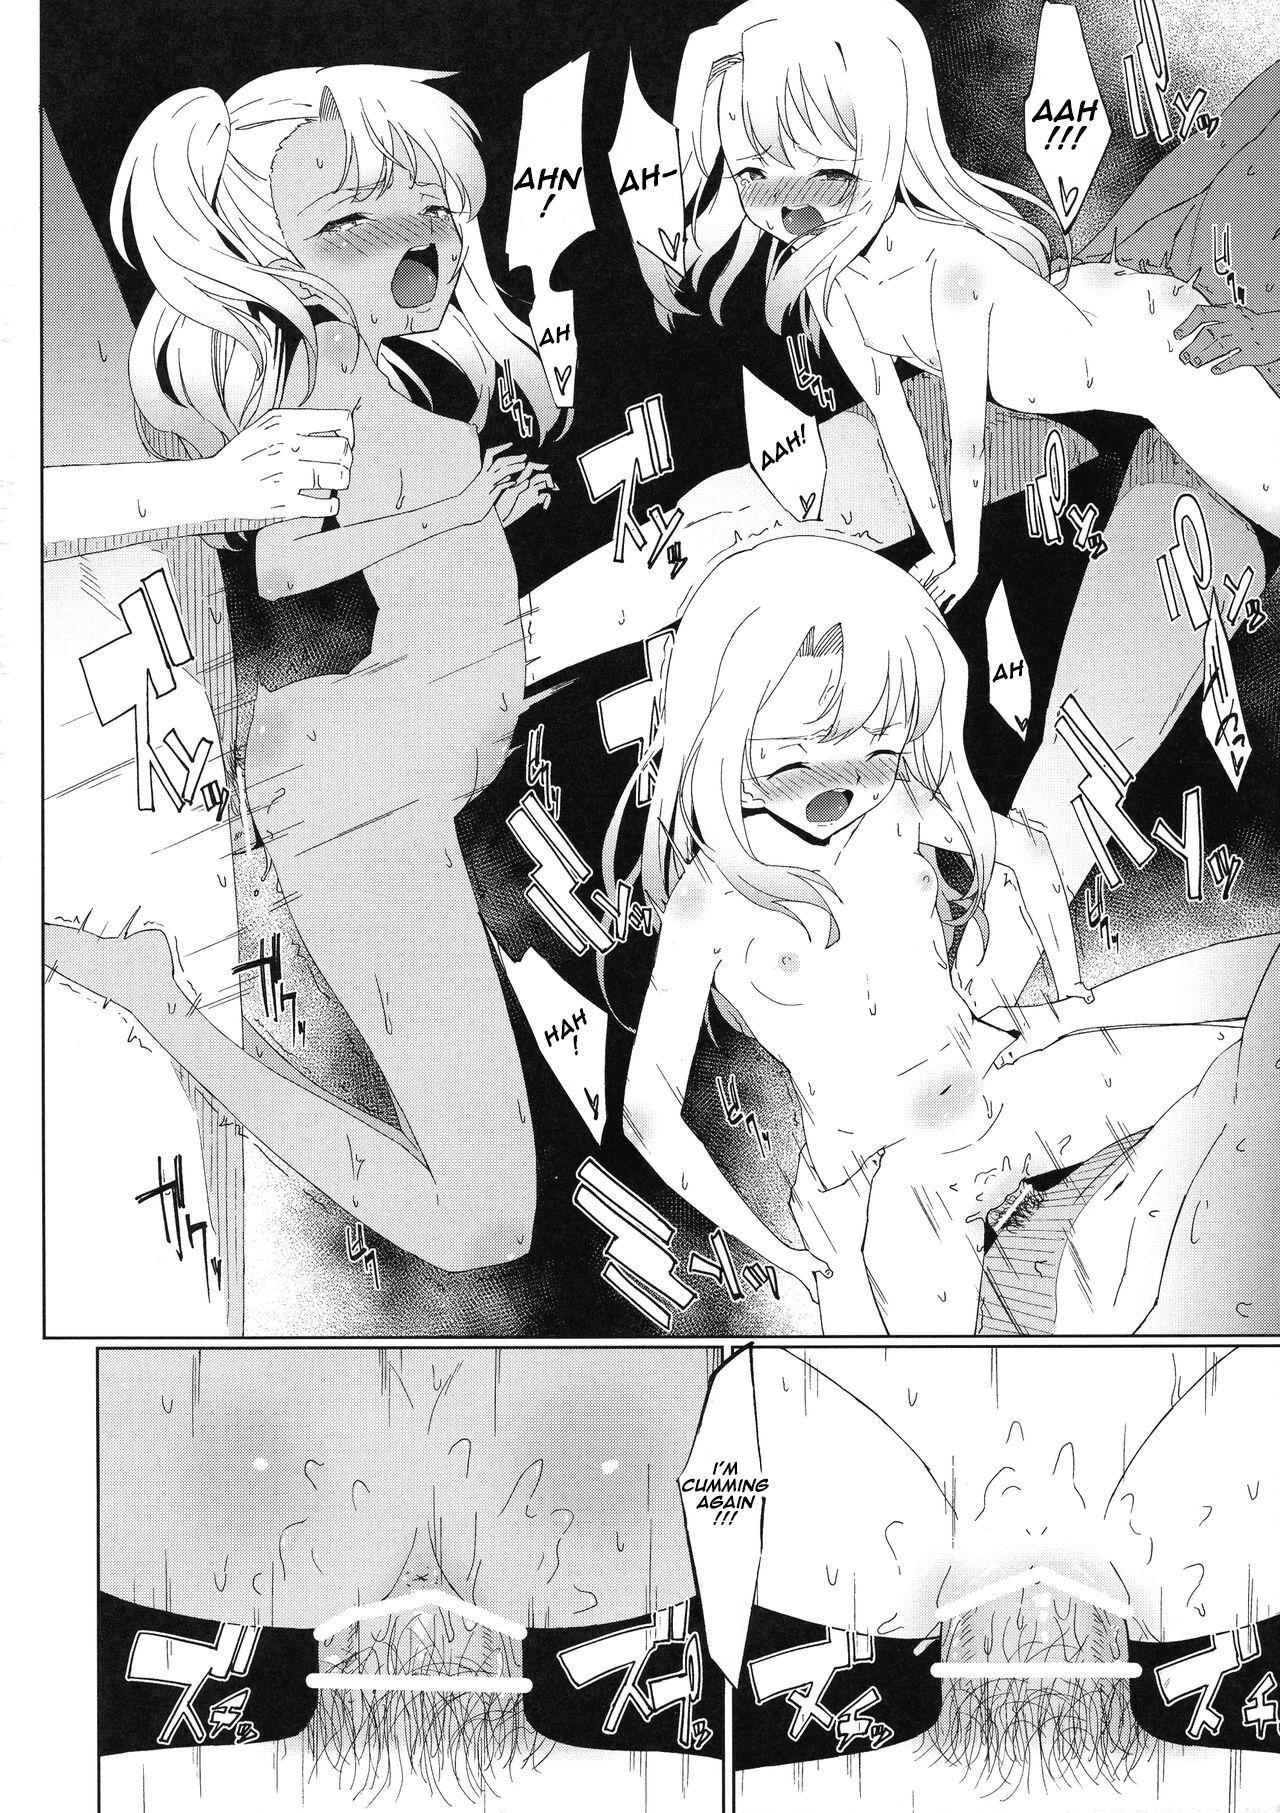 Vagina Oshiete Onii-chan - Fate kaleid liner prisma illya Candid - Page 10